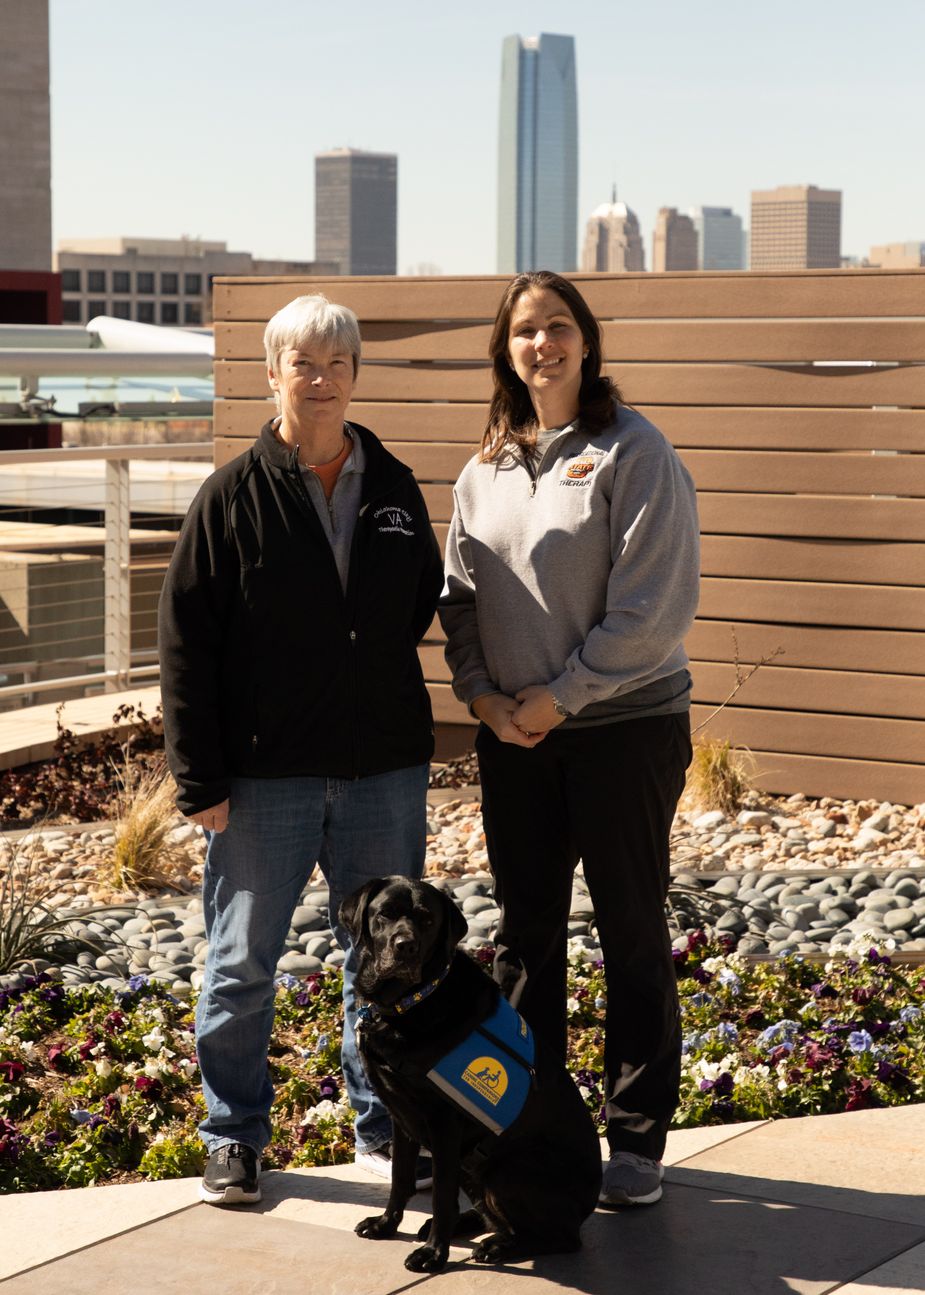 Kristy Doyle, supervisor of therapeutic recreation at the Oklahoma City VA Medical Center, and Sarah Sands, a recreational therapist at the VA, pose with Raisin. Photo by Phillip Ybarra